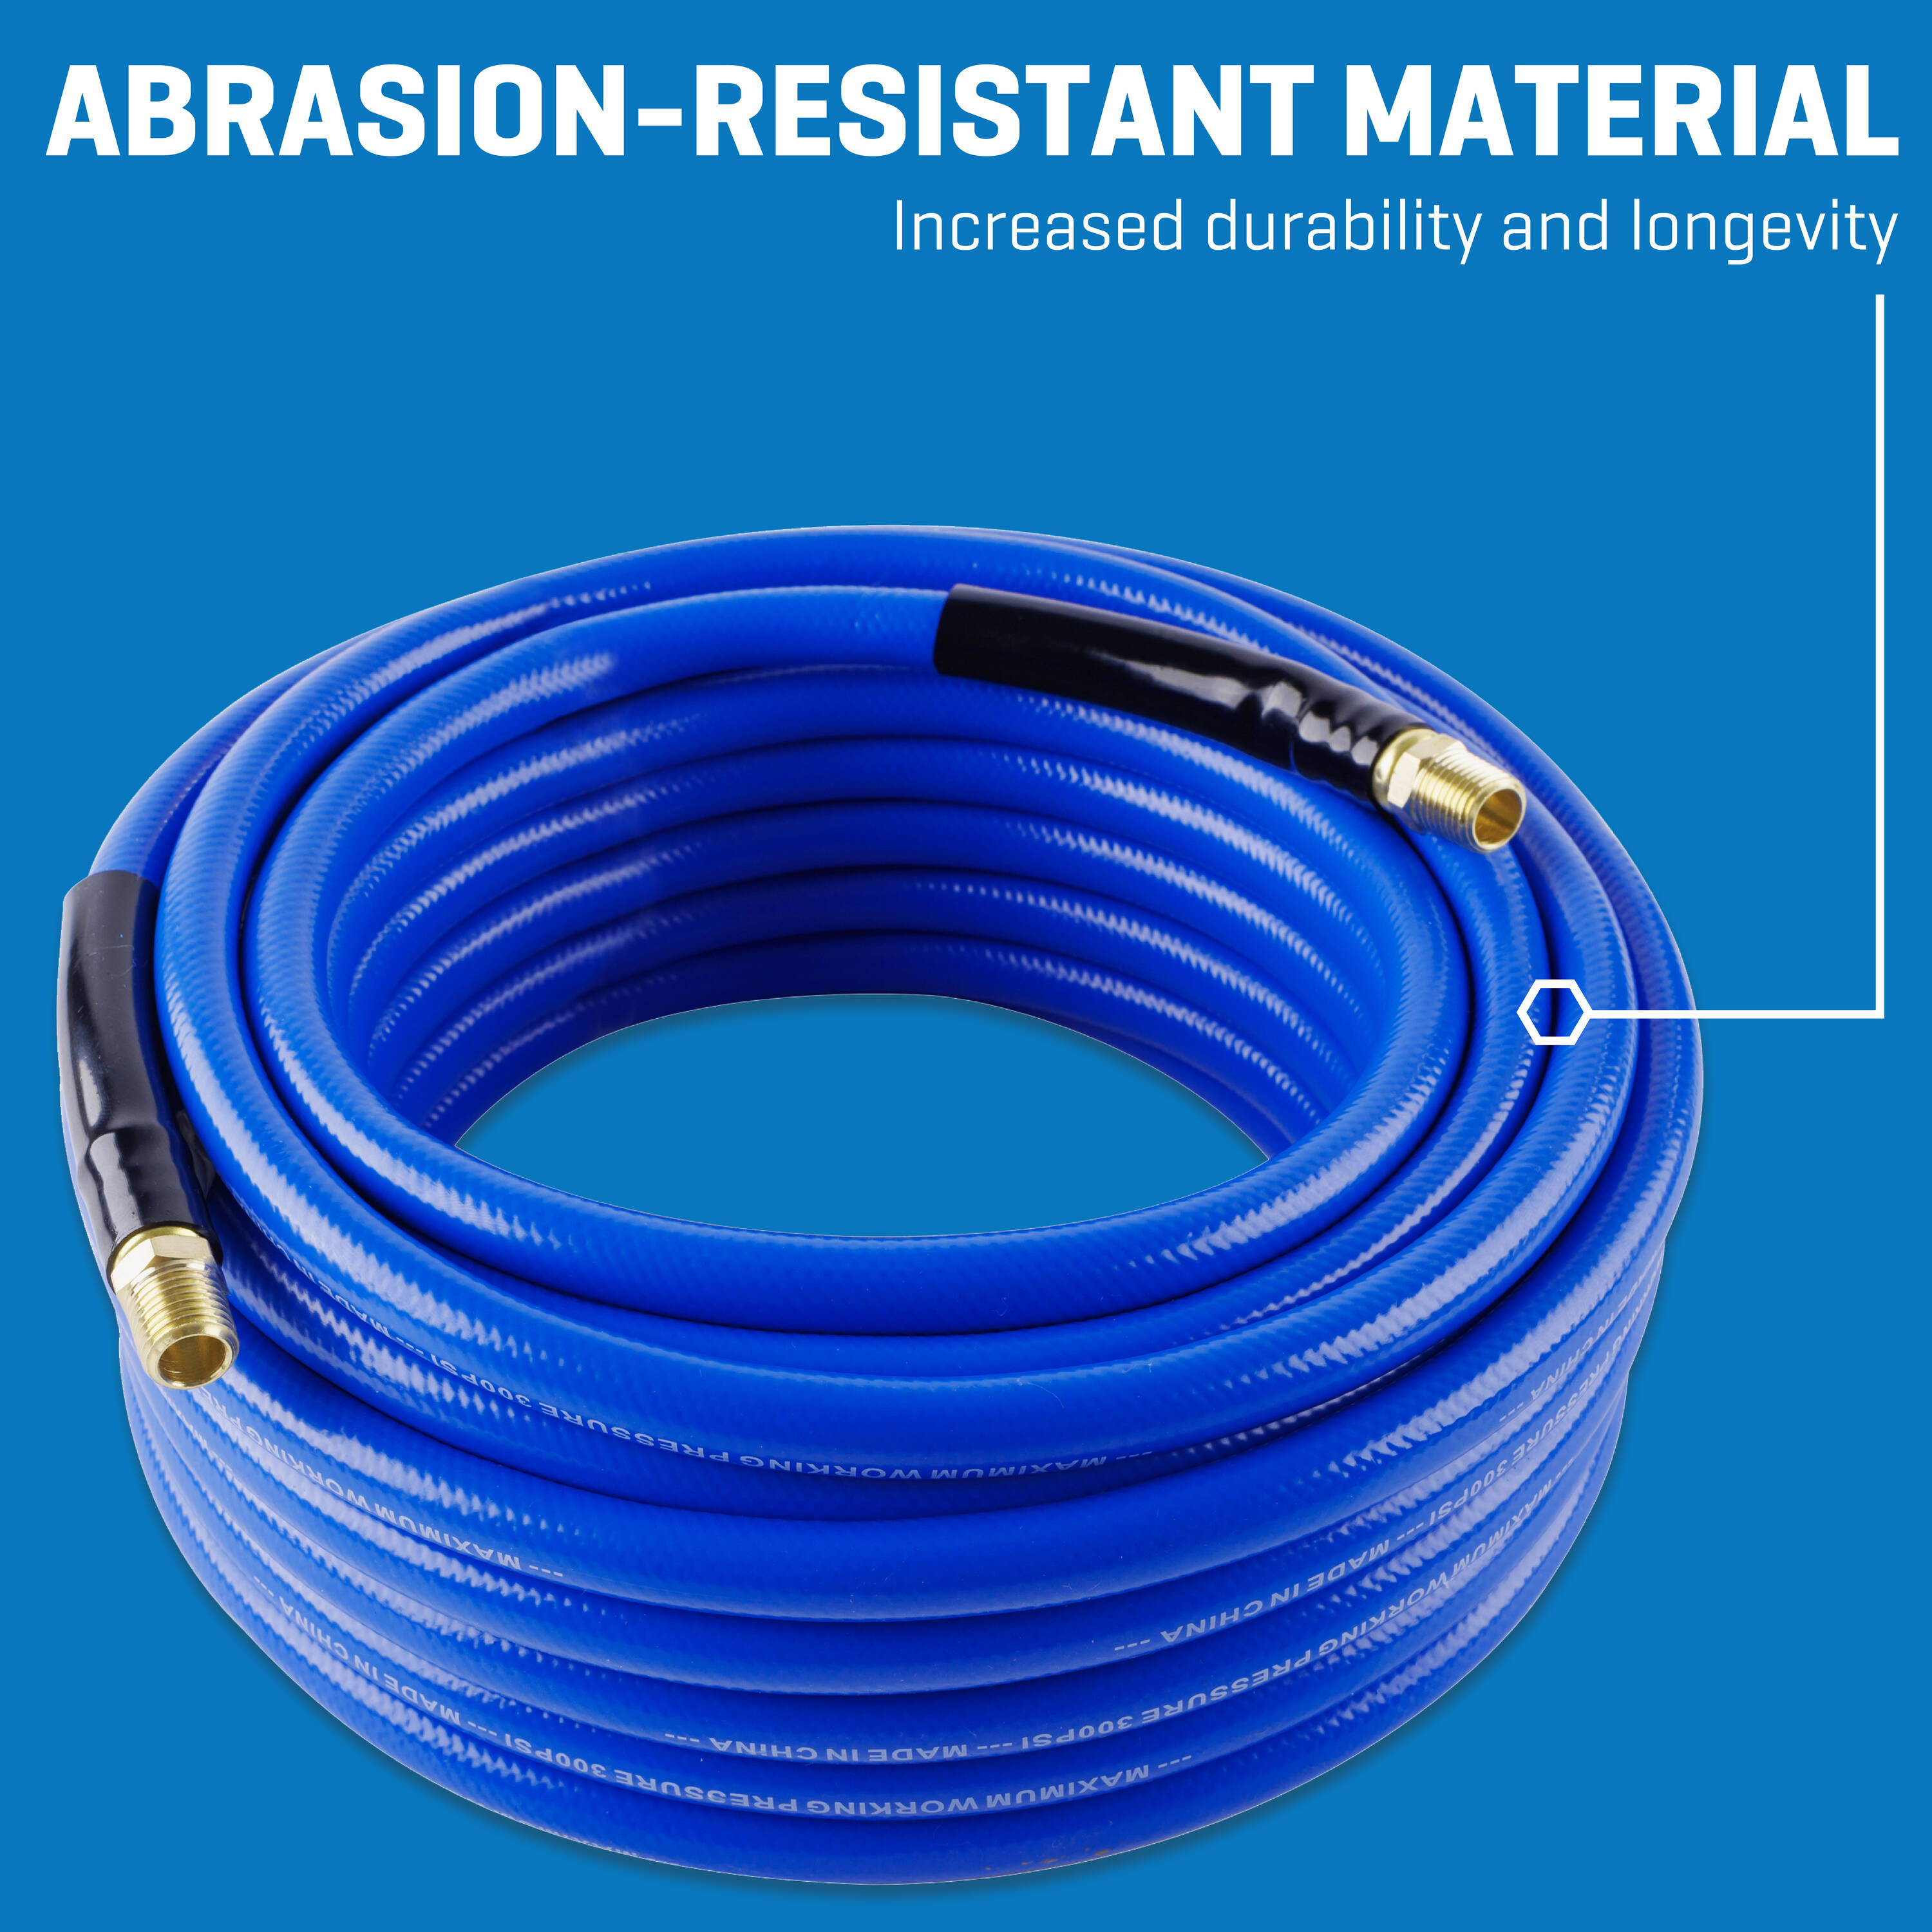 Kobalt 3/8-in x 50-Ft PVC Air Hose in the Air Compressor Hoses department  at